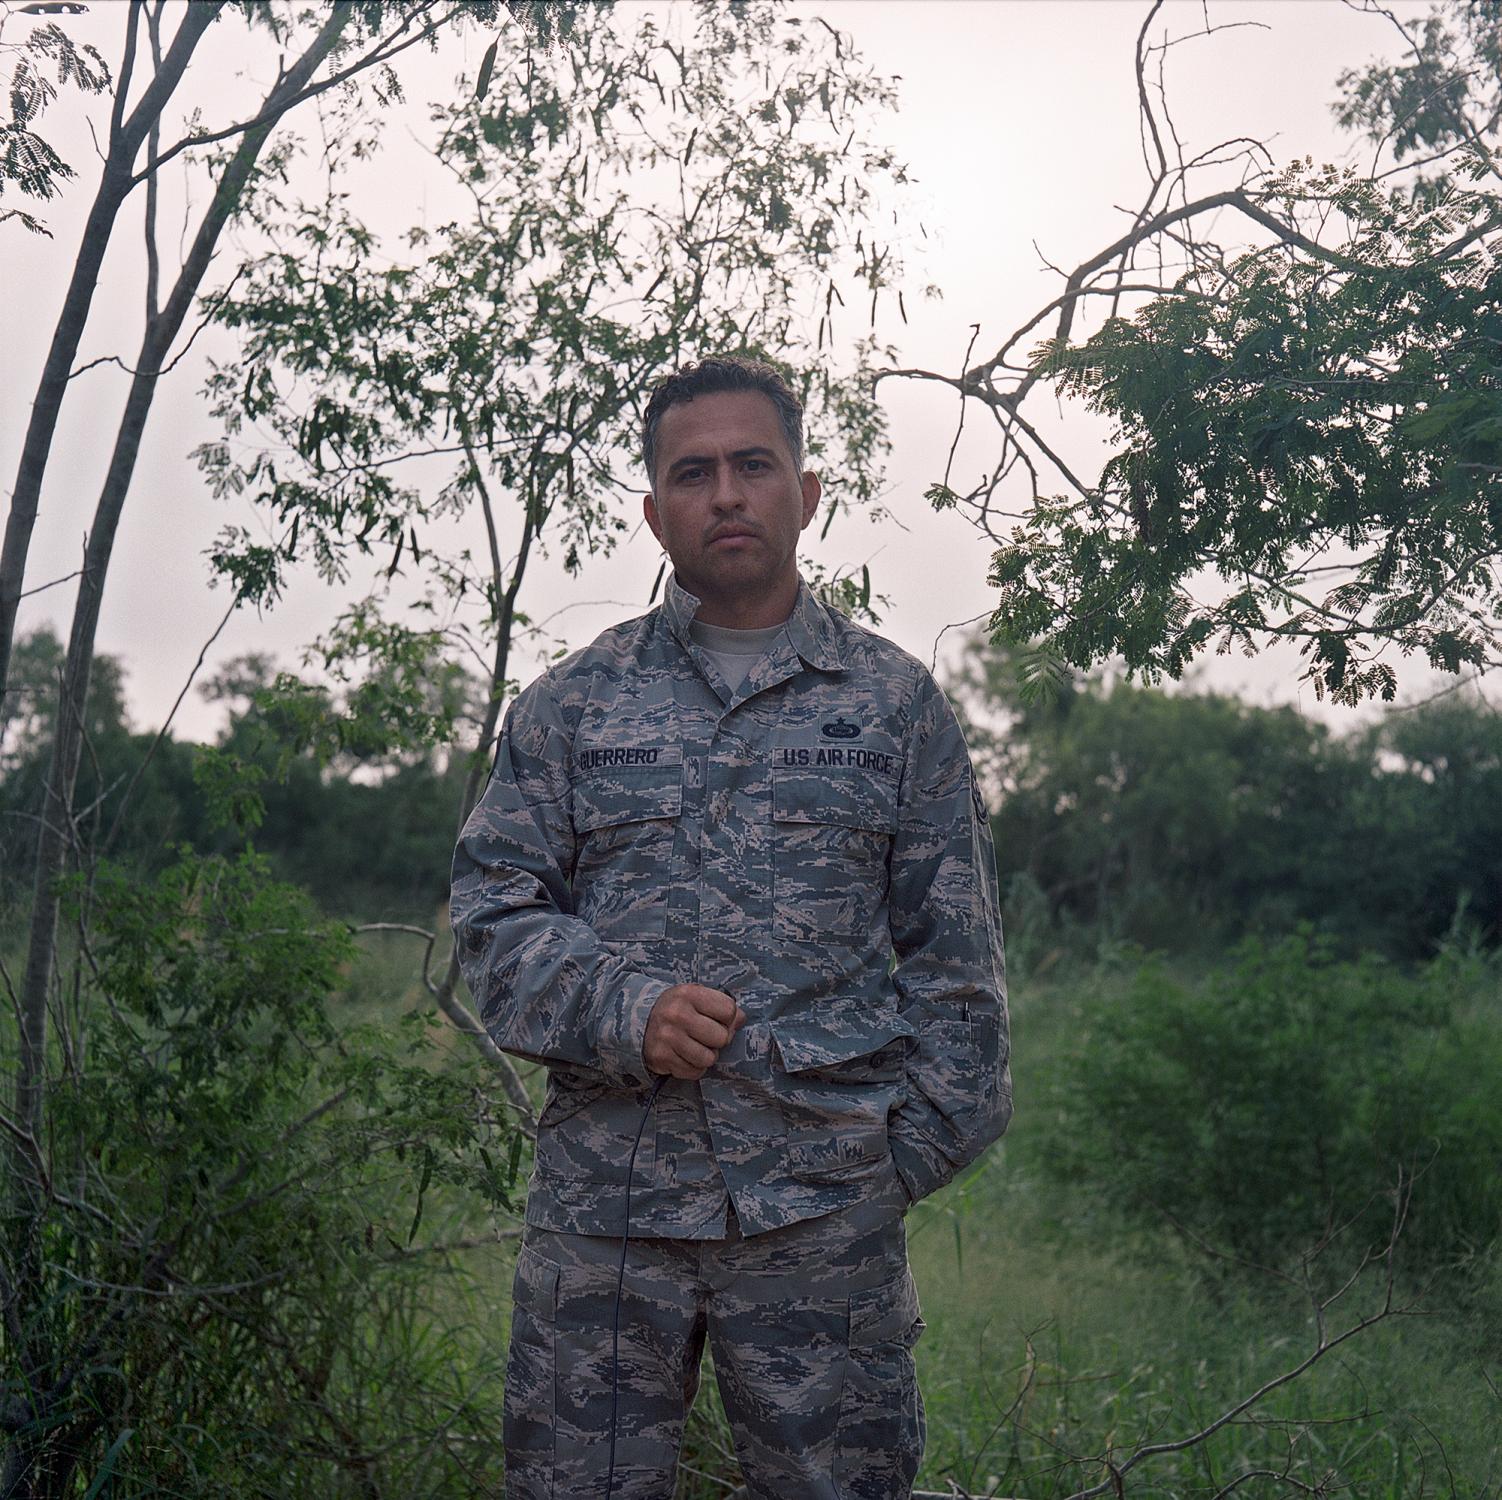  Brownsville, TX - OCTOBER 17, 2020: Self-portrait at the U.S.-Mexico border. 